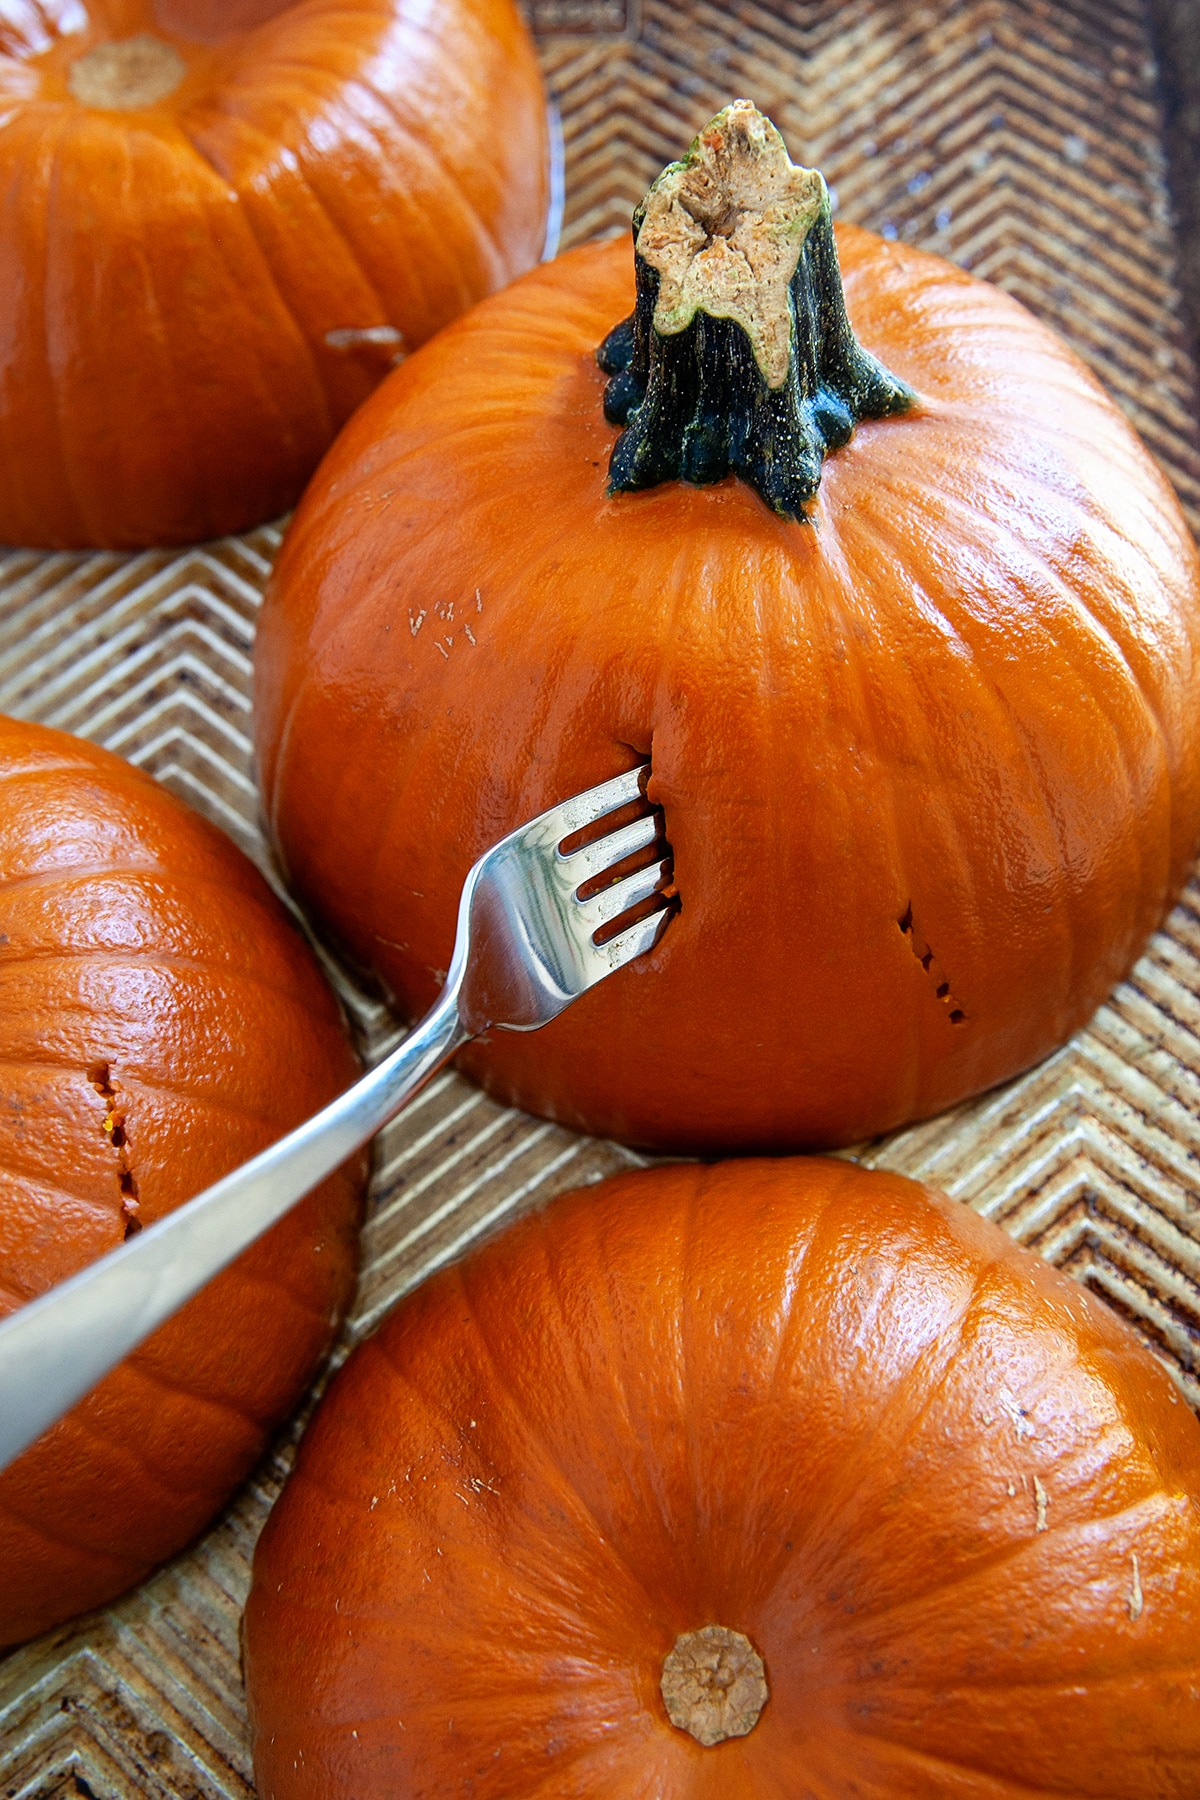 Putting a fork into a cooked pumpkin. 